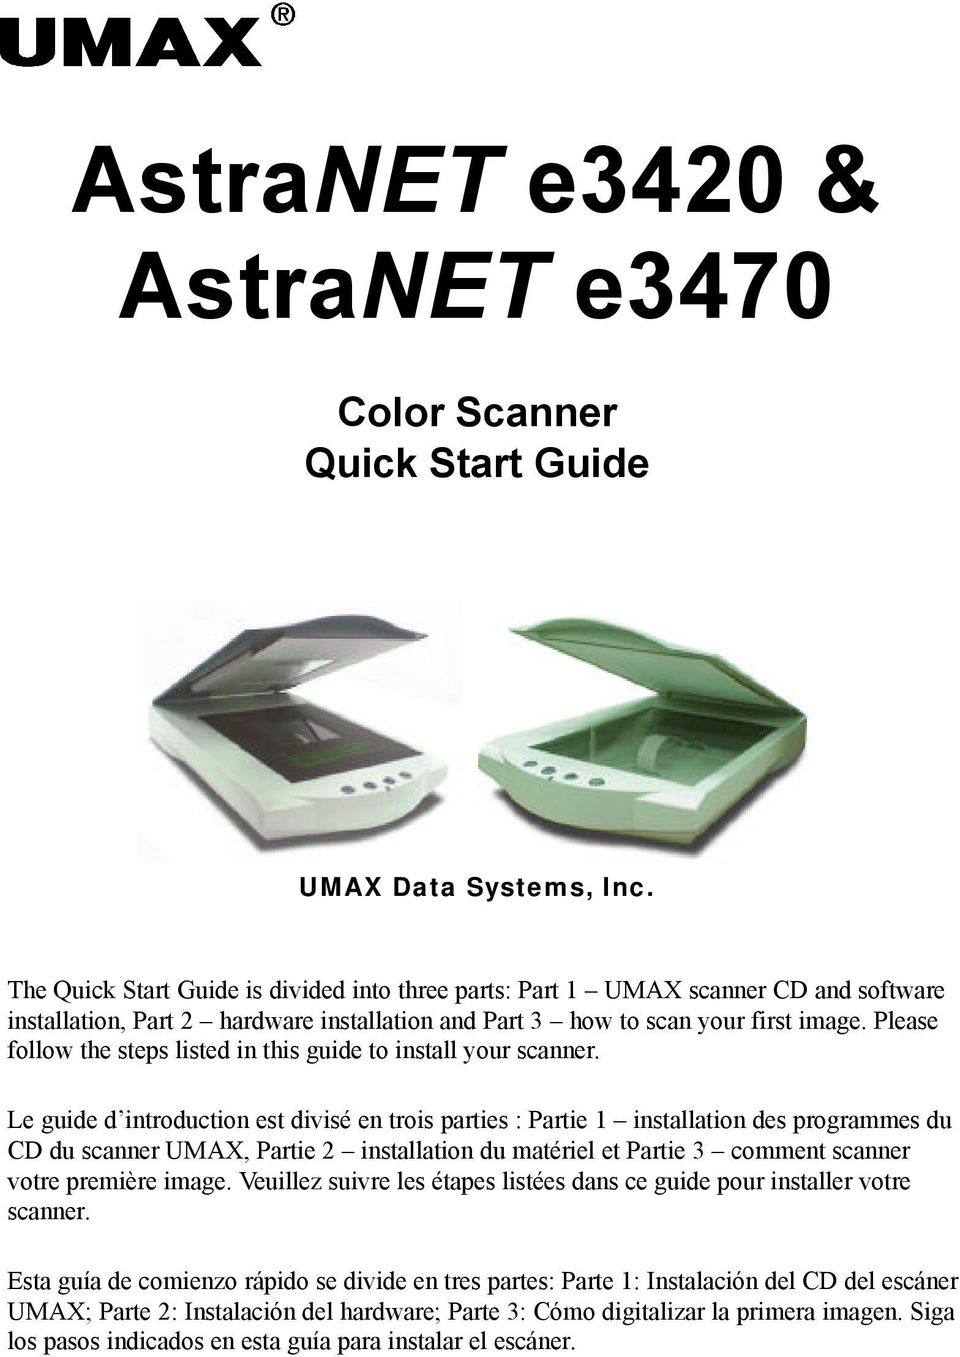 Please follow the steps listed in this guide to install your scanner.